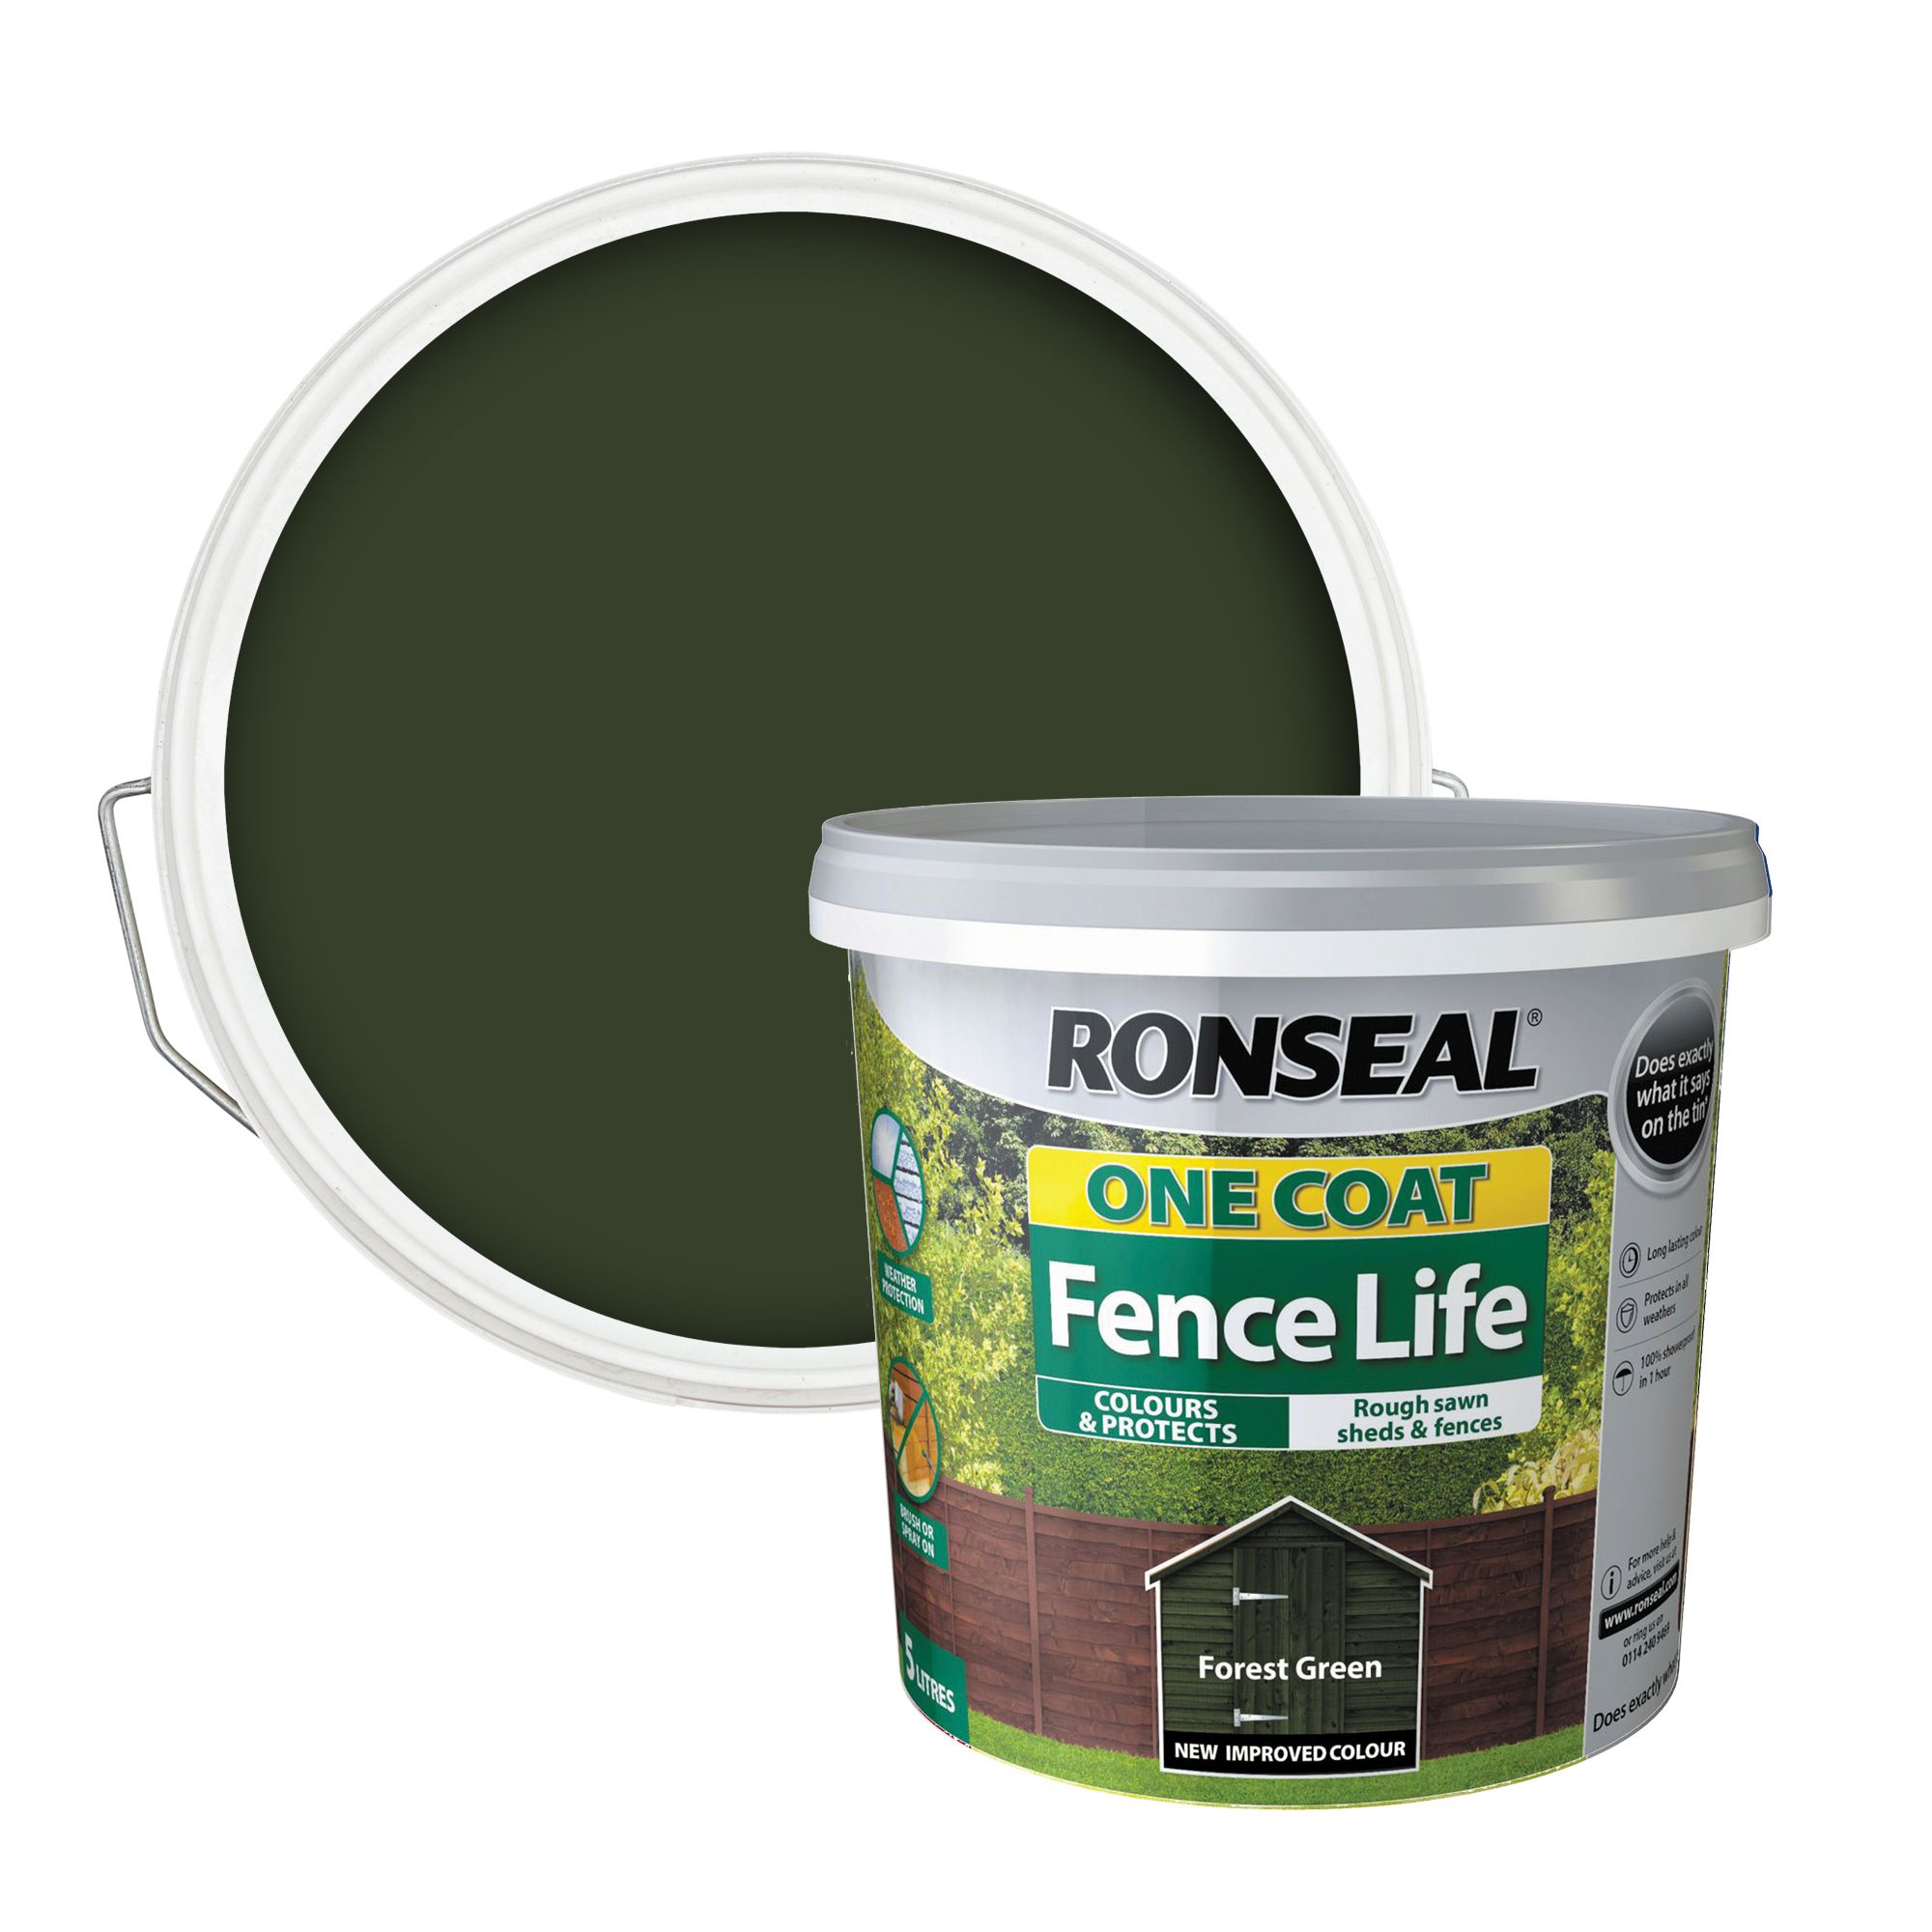 Ronseal One Coat Fence Life Forest green Matt Exterior Wood paint, 5L Tub